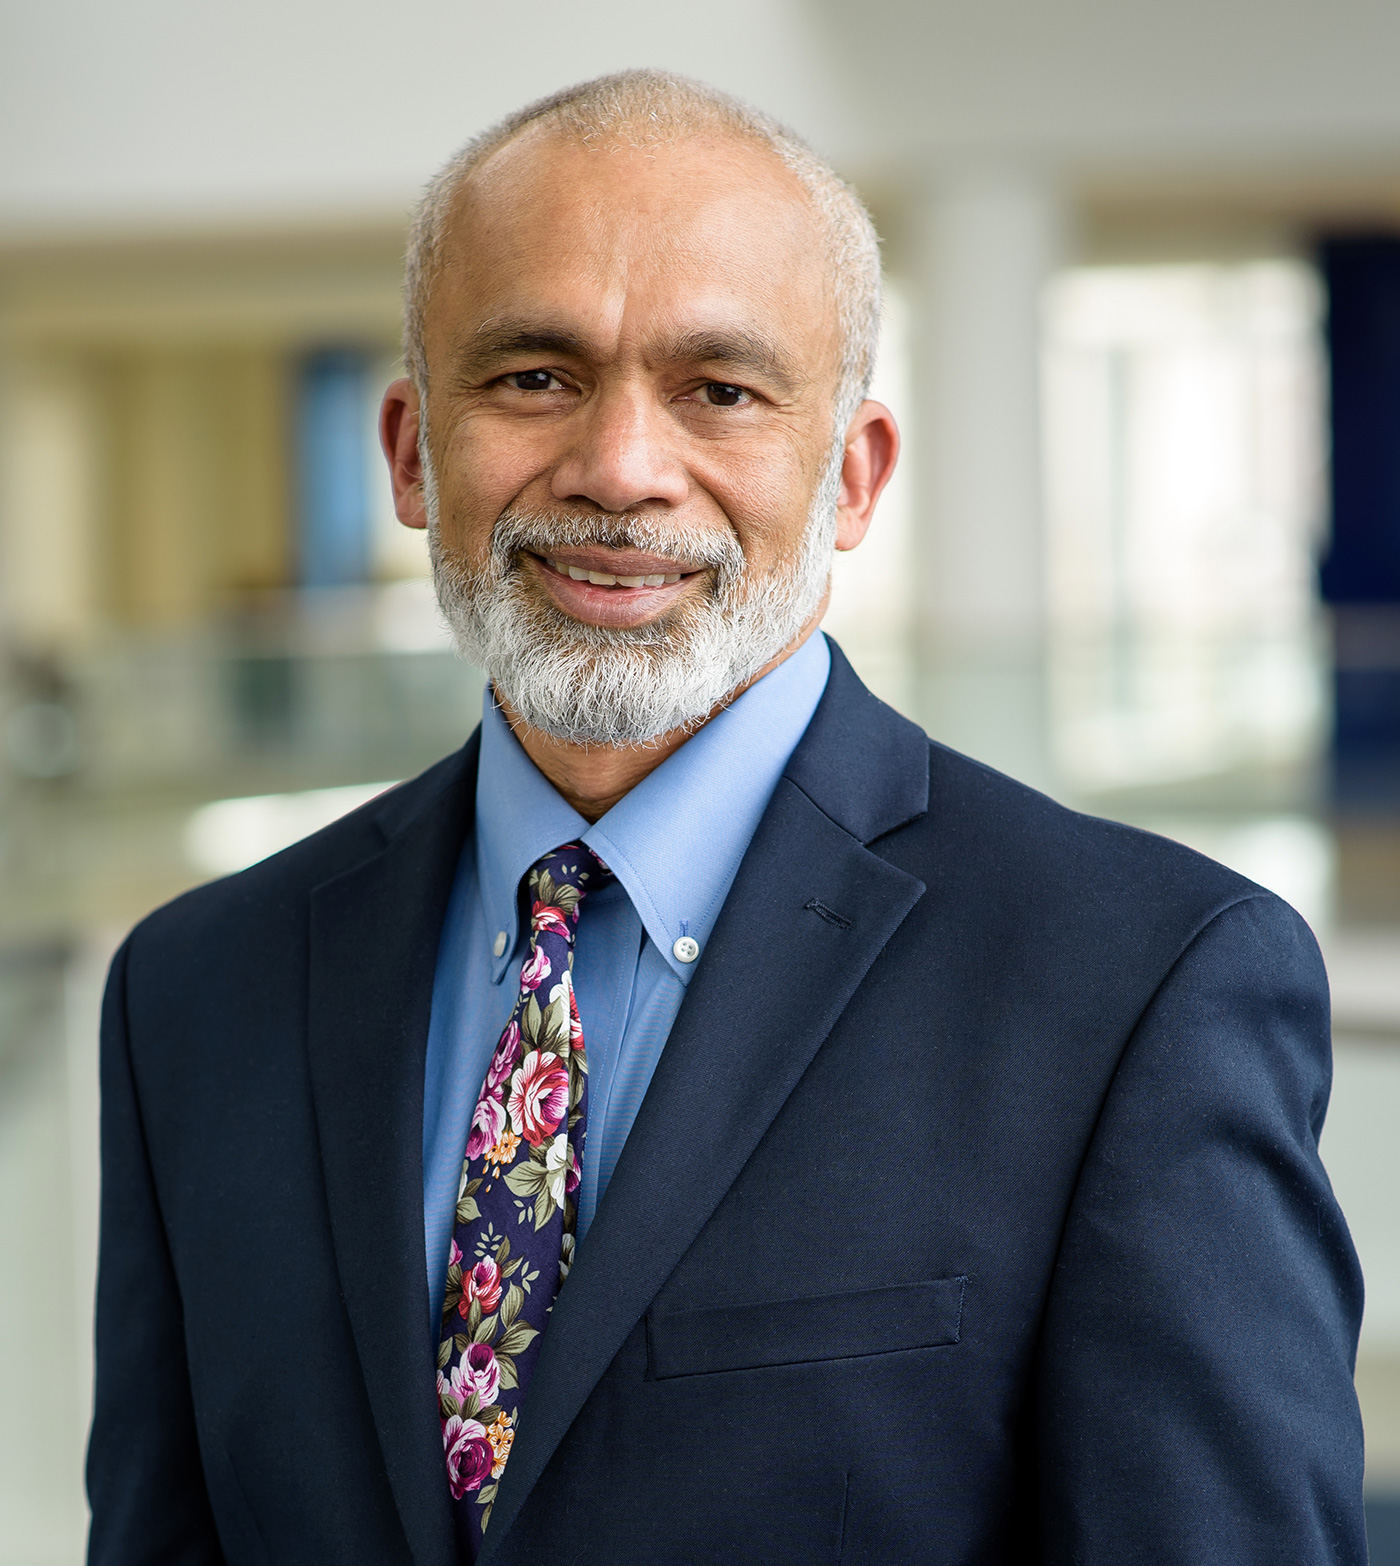 Luvai F. Motiwalla is a Professor in the Manning School of Business - Operations and Information Systems Department at UMass Lowell.